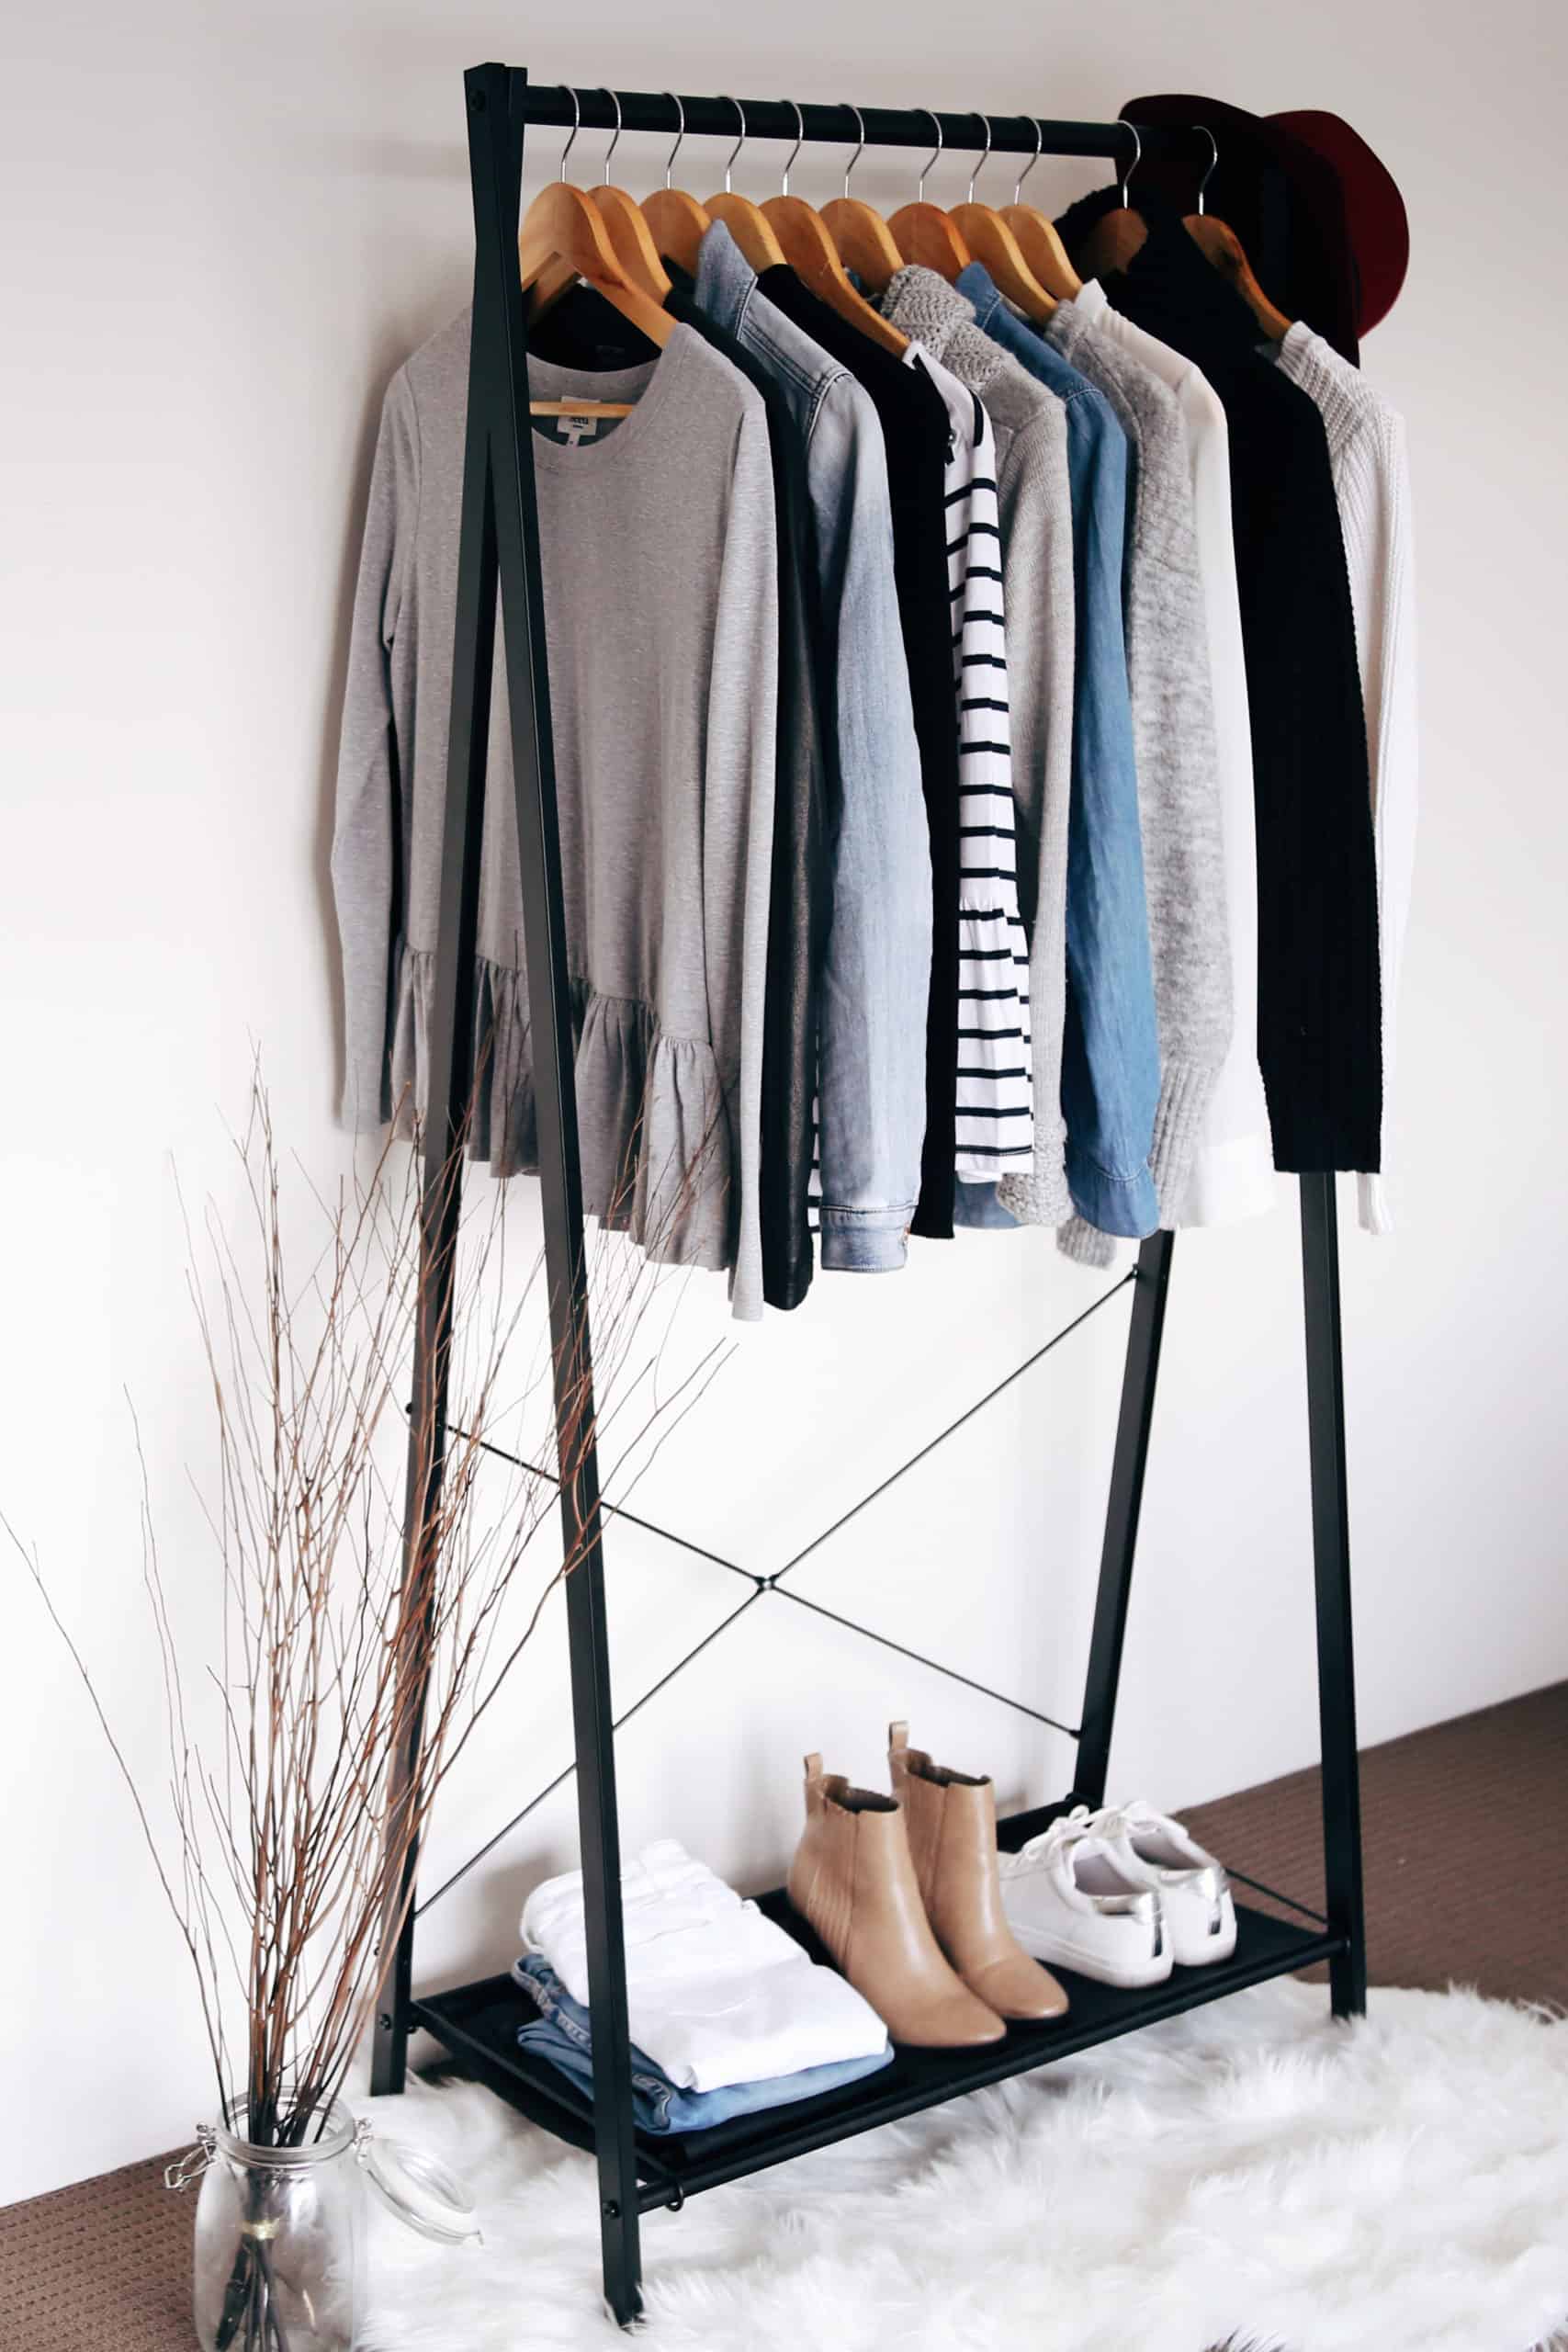 Clothes rack holds multiple sweaters, shoes, jeans and a hat.